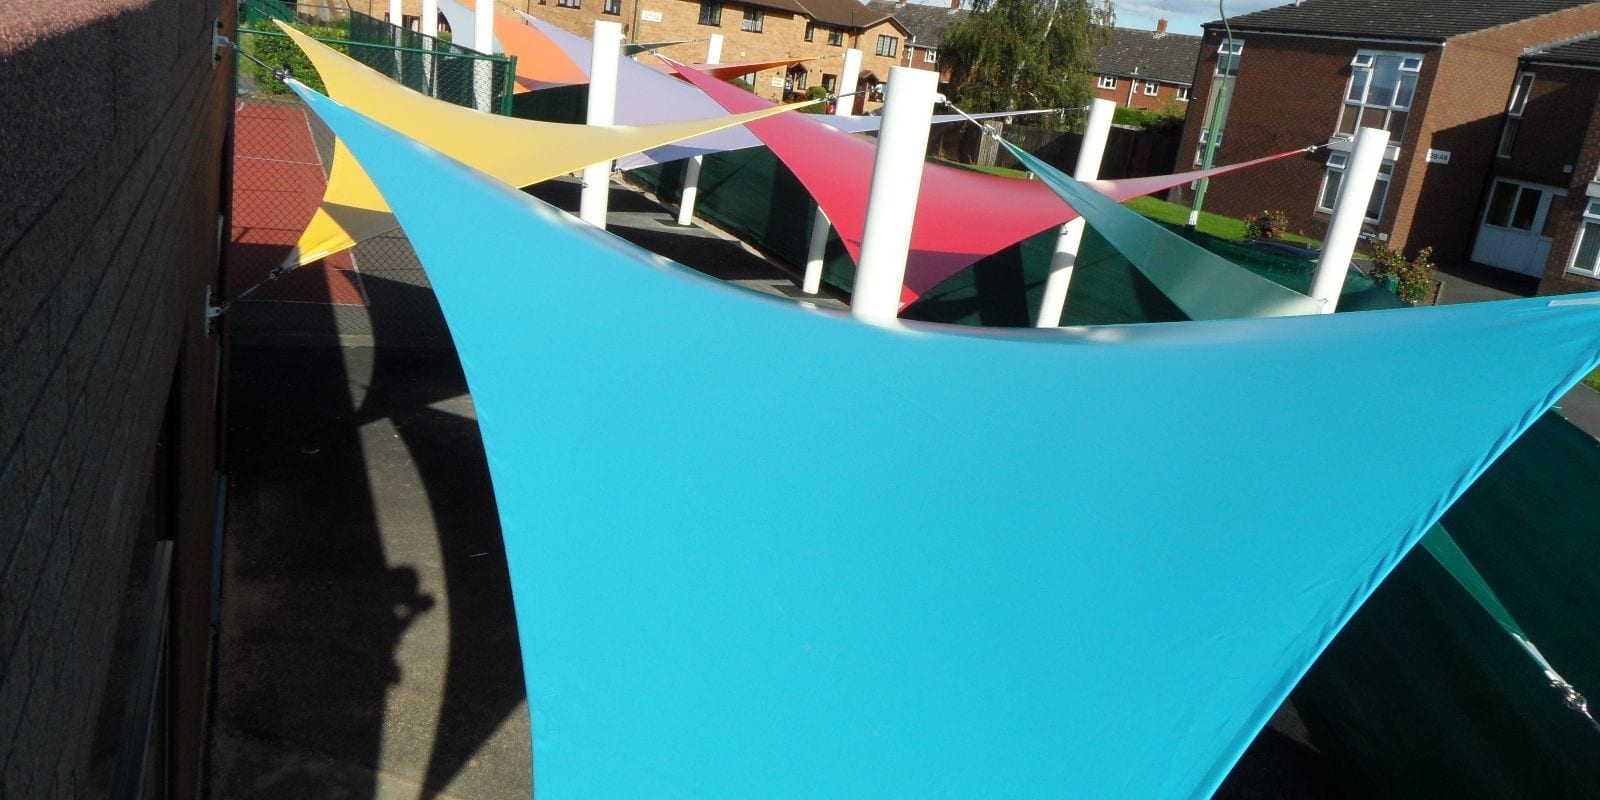 Shade sails we designed for Severndale Special School